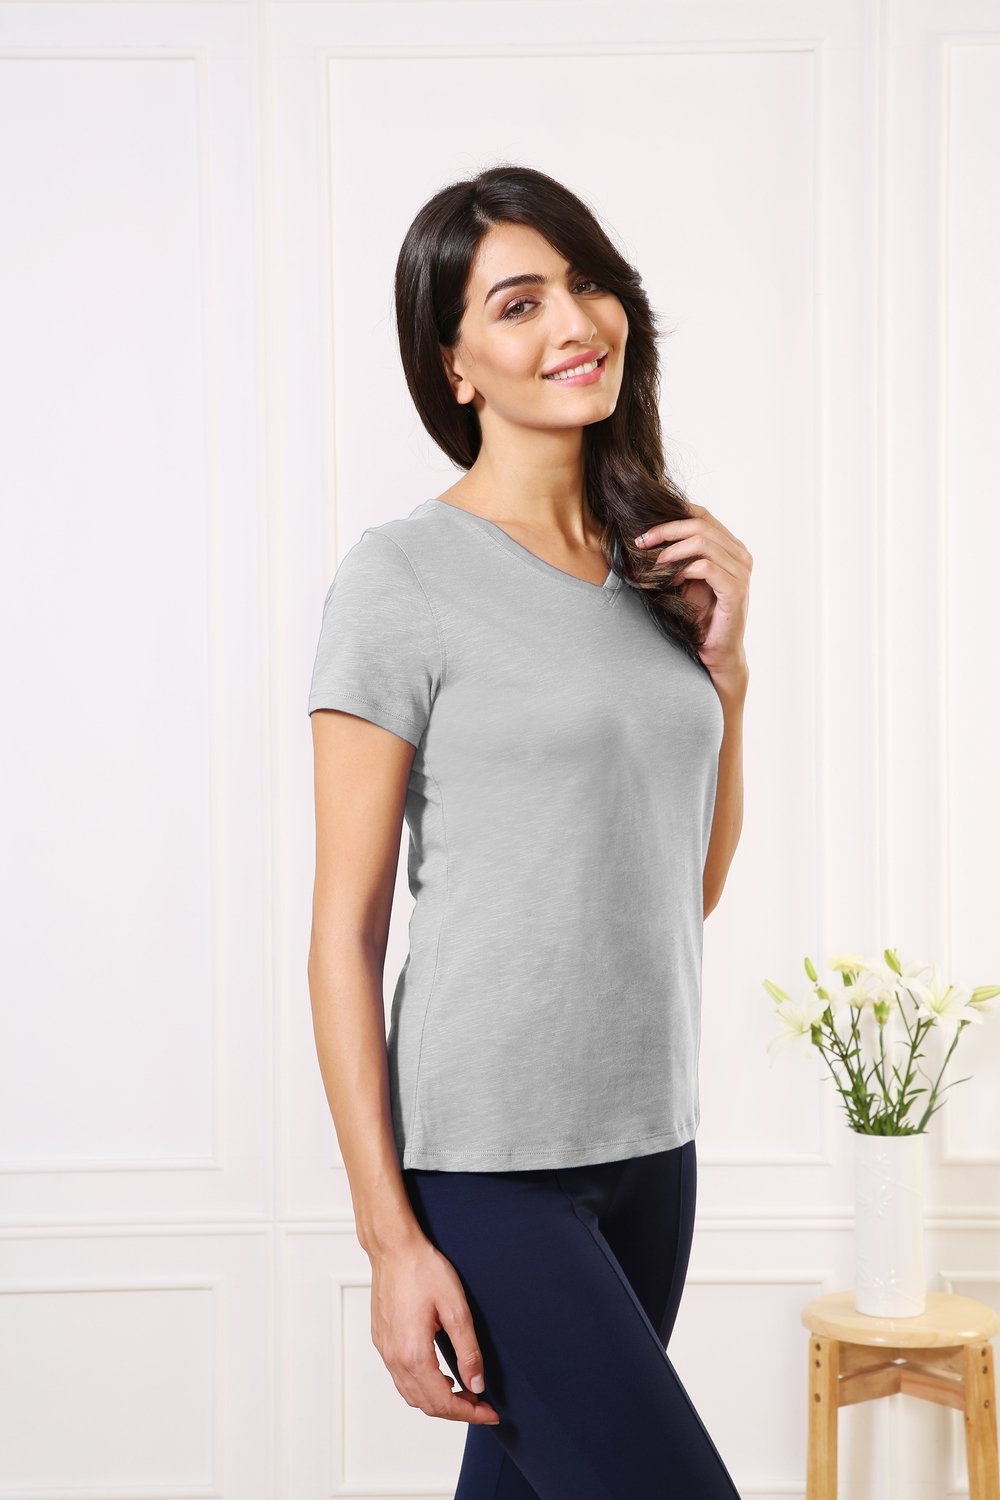 Cotton V-Neck Every day Wear Grey tee t-shirt tops for Girls - Stilento